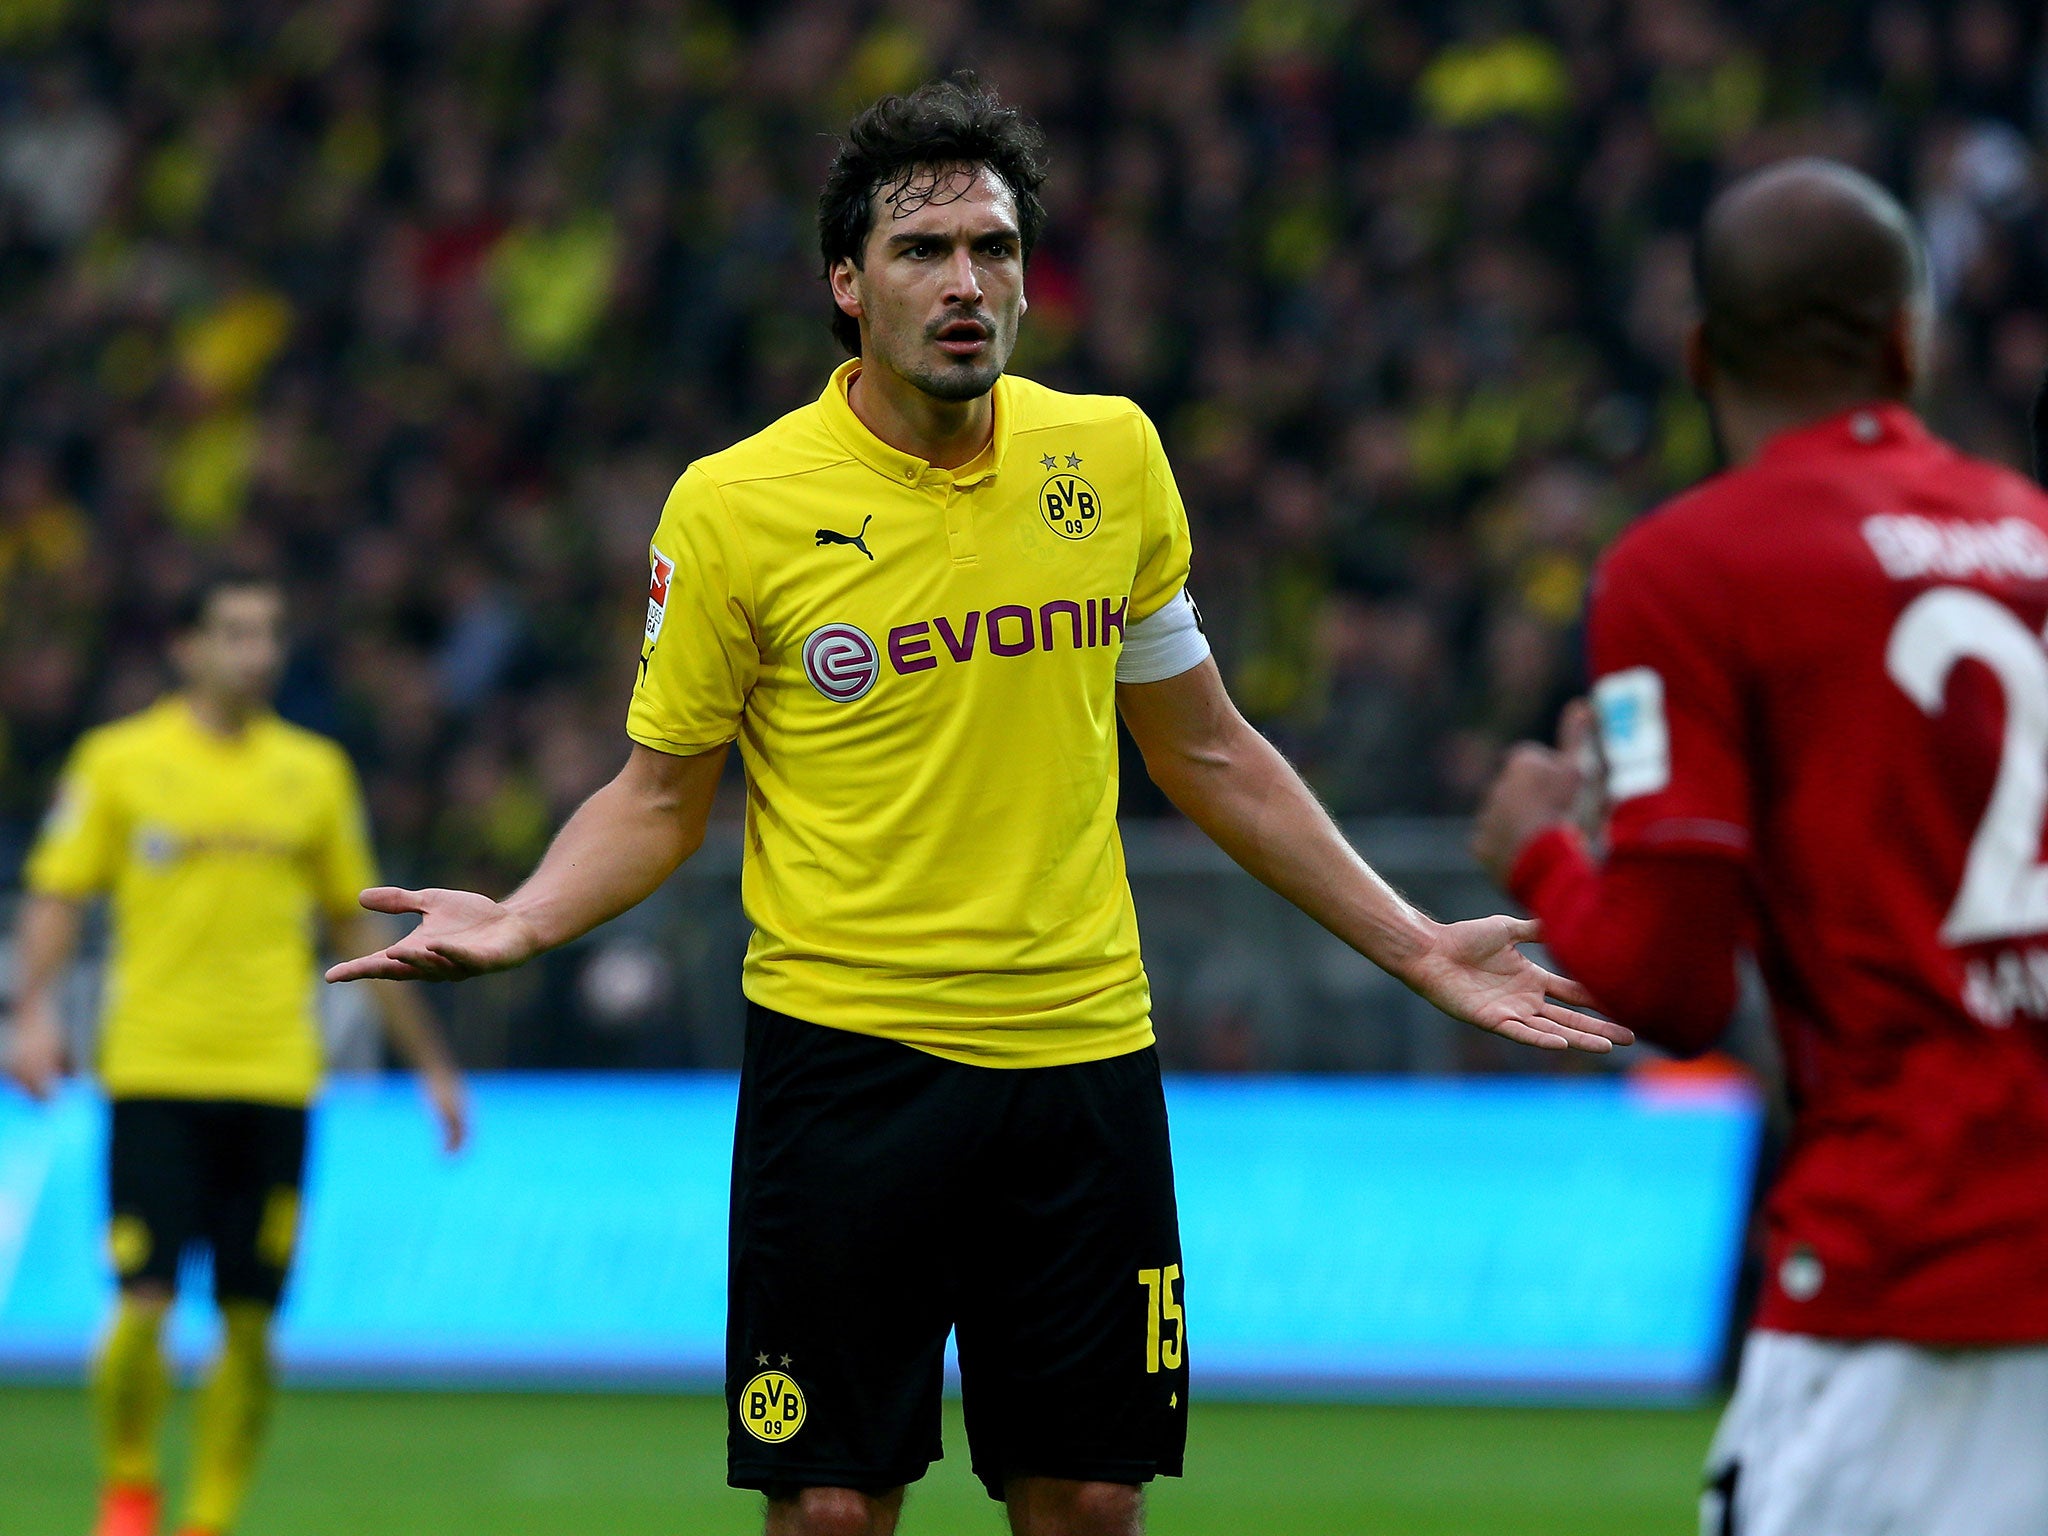 Mats Hummels has been linked with Manchester United